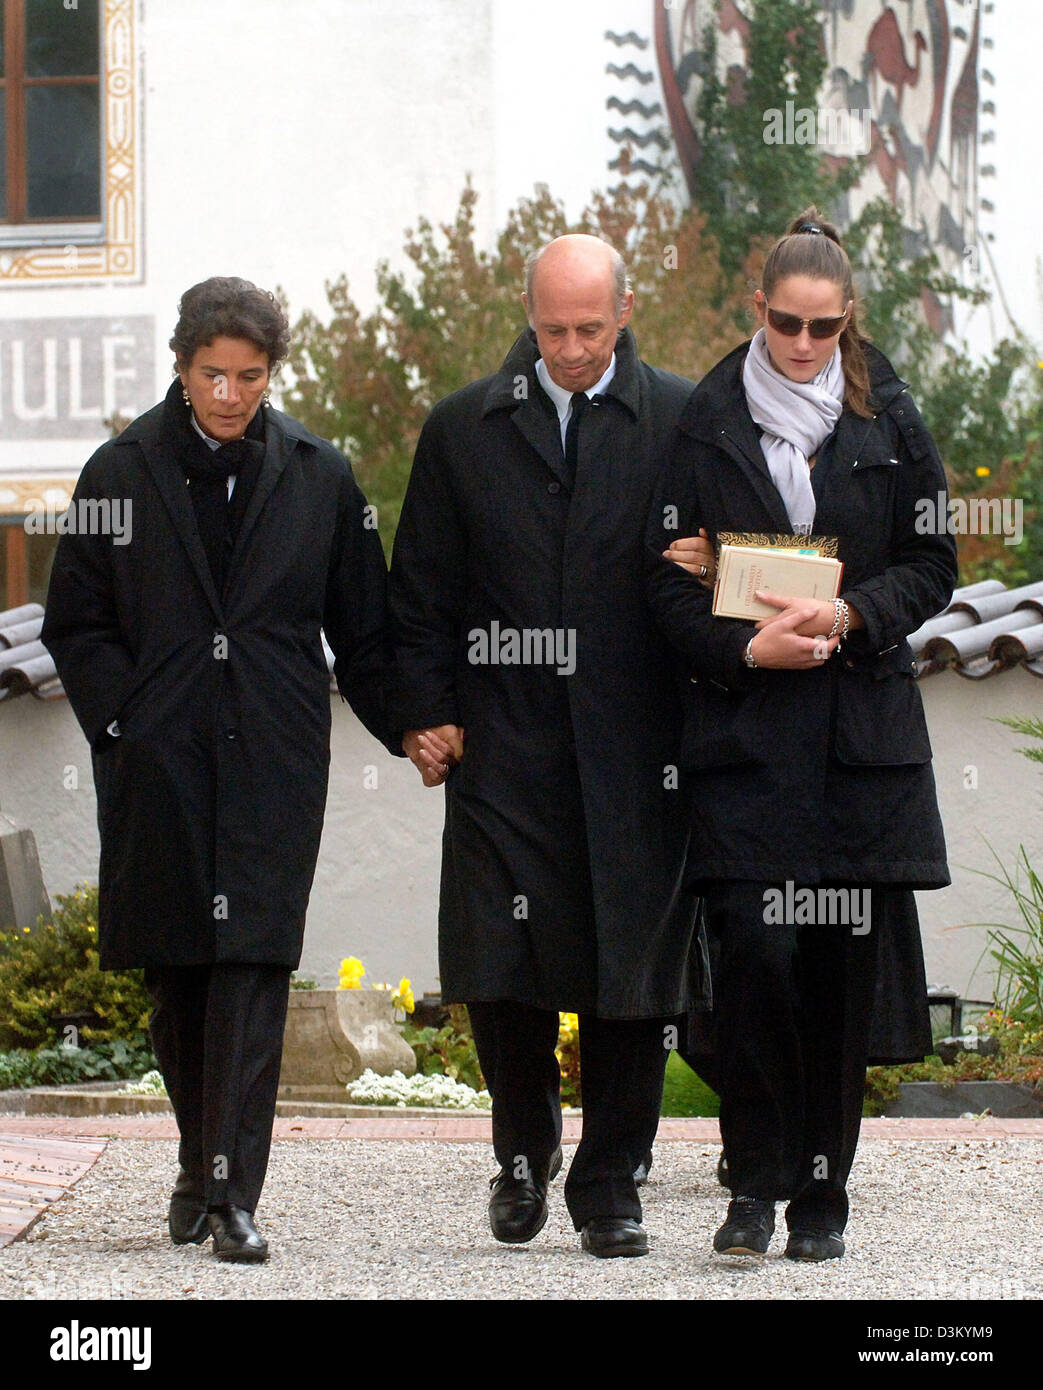 dpa) - German fashion designers Willy Bogner (C) and Sonia Bogner (L) and  their daughter Florinda (R) walk over to the funeral service for their son  Bernhard at the cemetery in Gmund